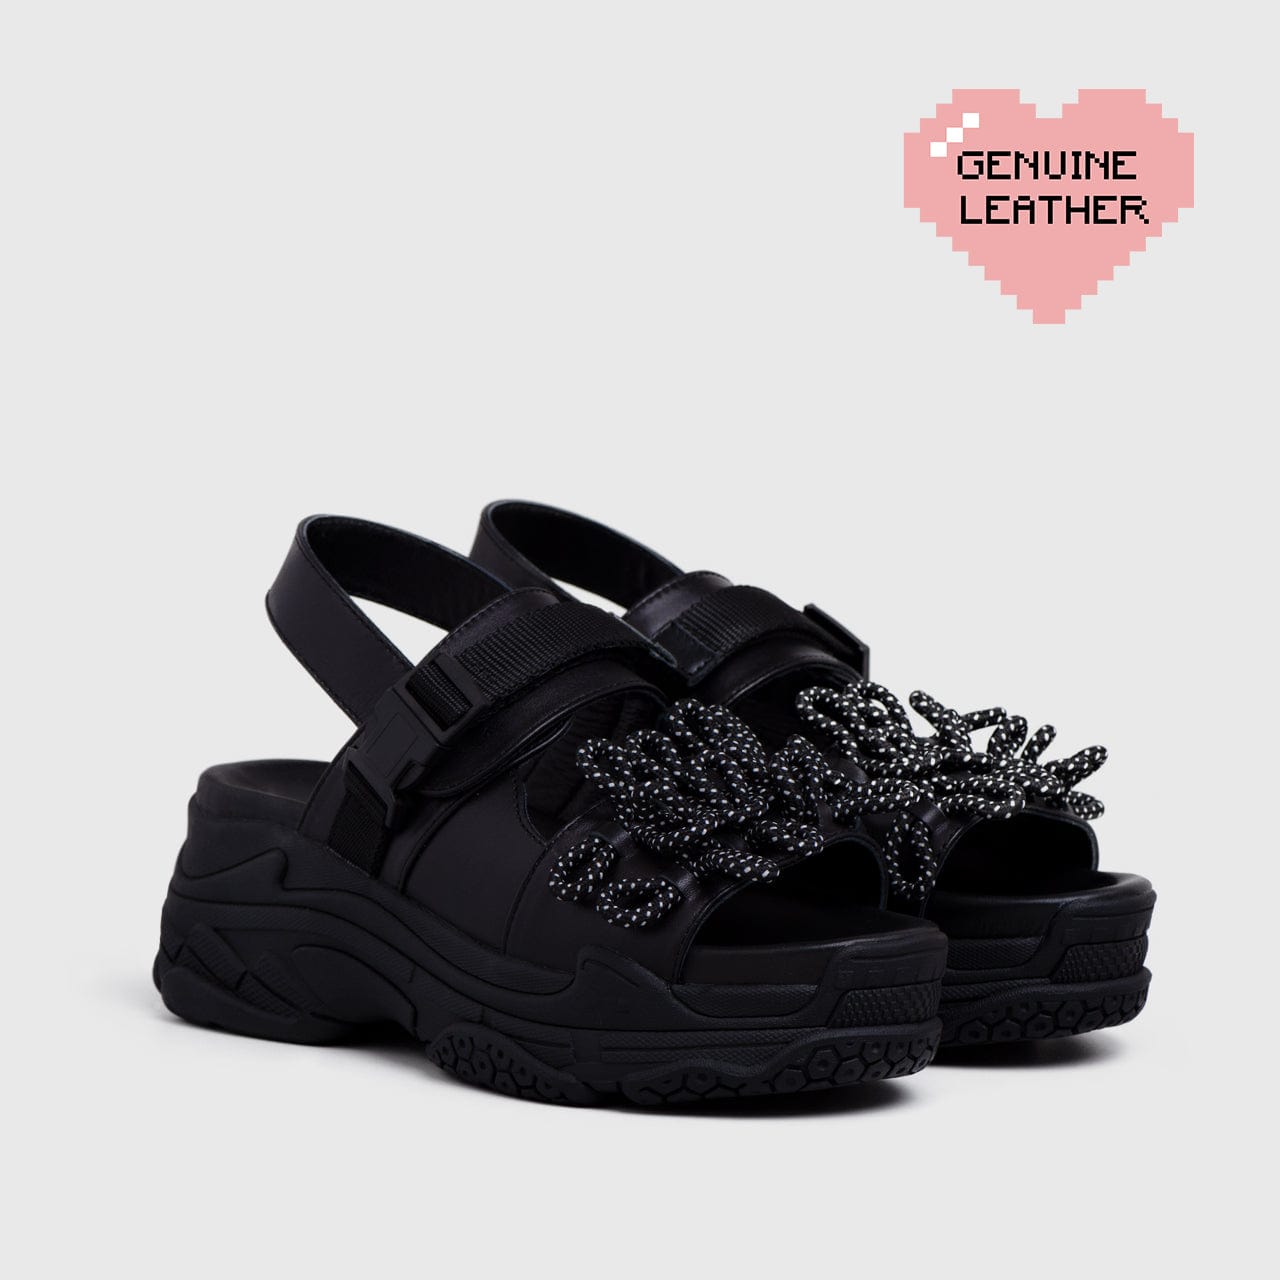 Adorable Projects Official Adorableprojects - Dooriya Sandals Genuine Leather Black